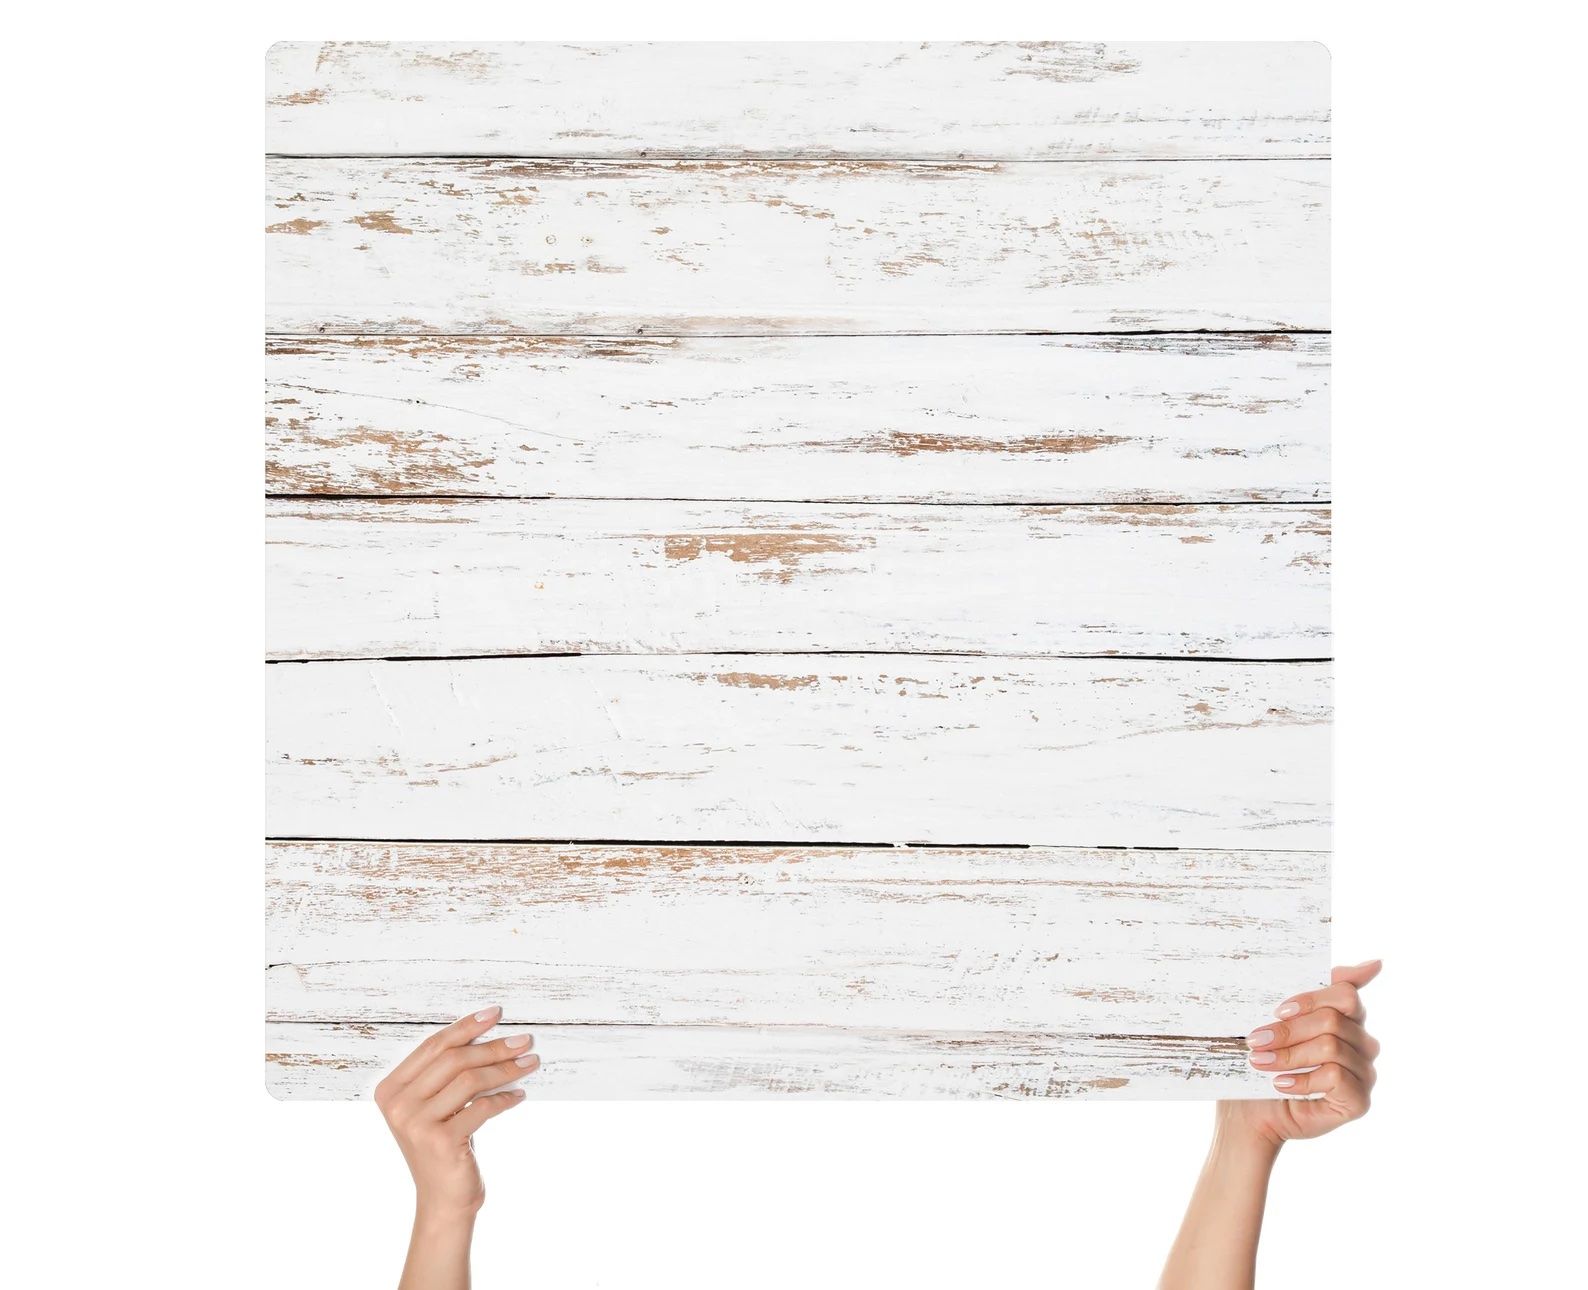 Aged white wood panel held up by two hands.